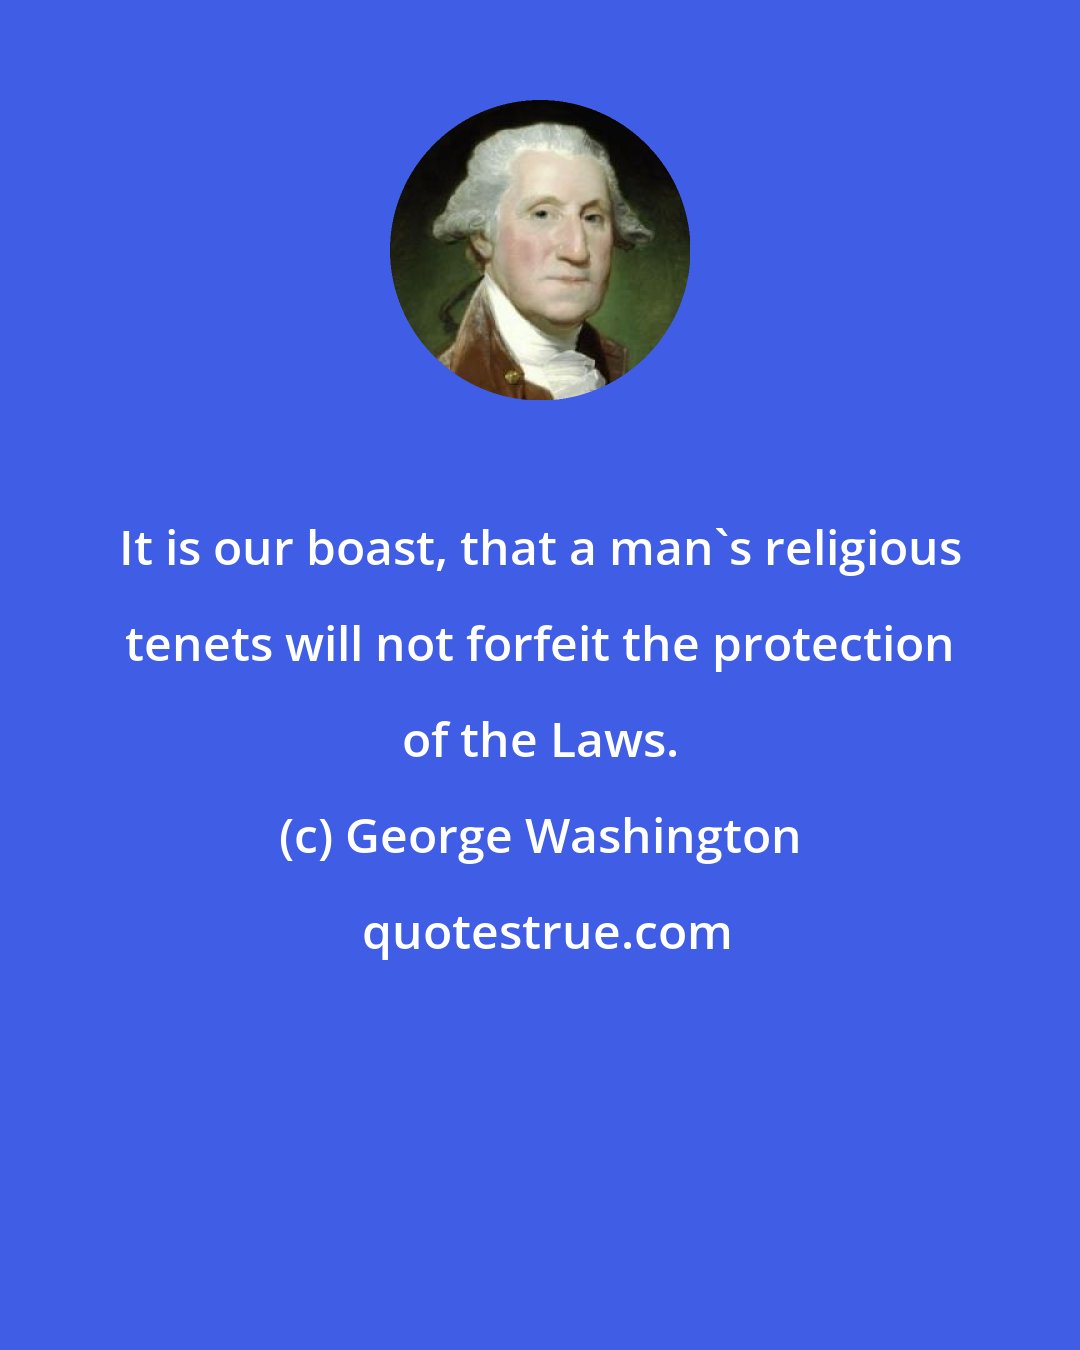 George Washington: It is our boast, that a man's religious tenets will not forfeit the protection of the Laws.